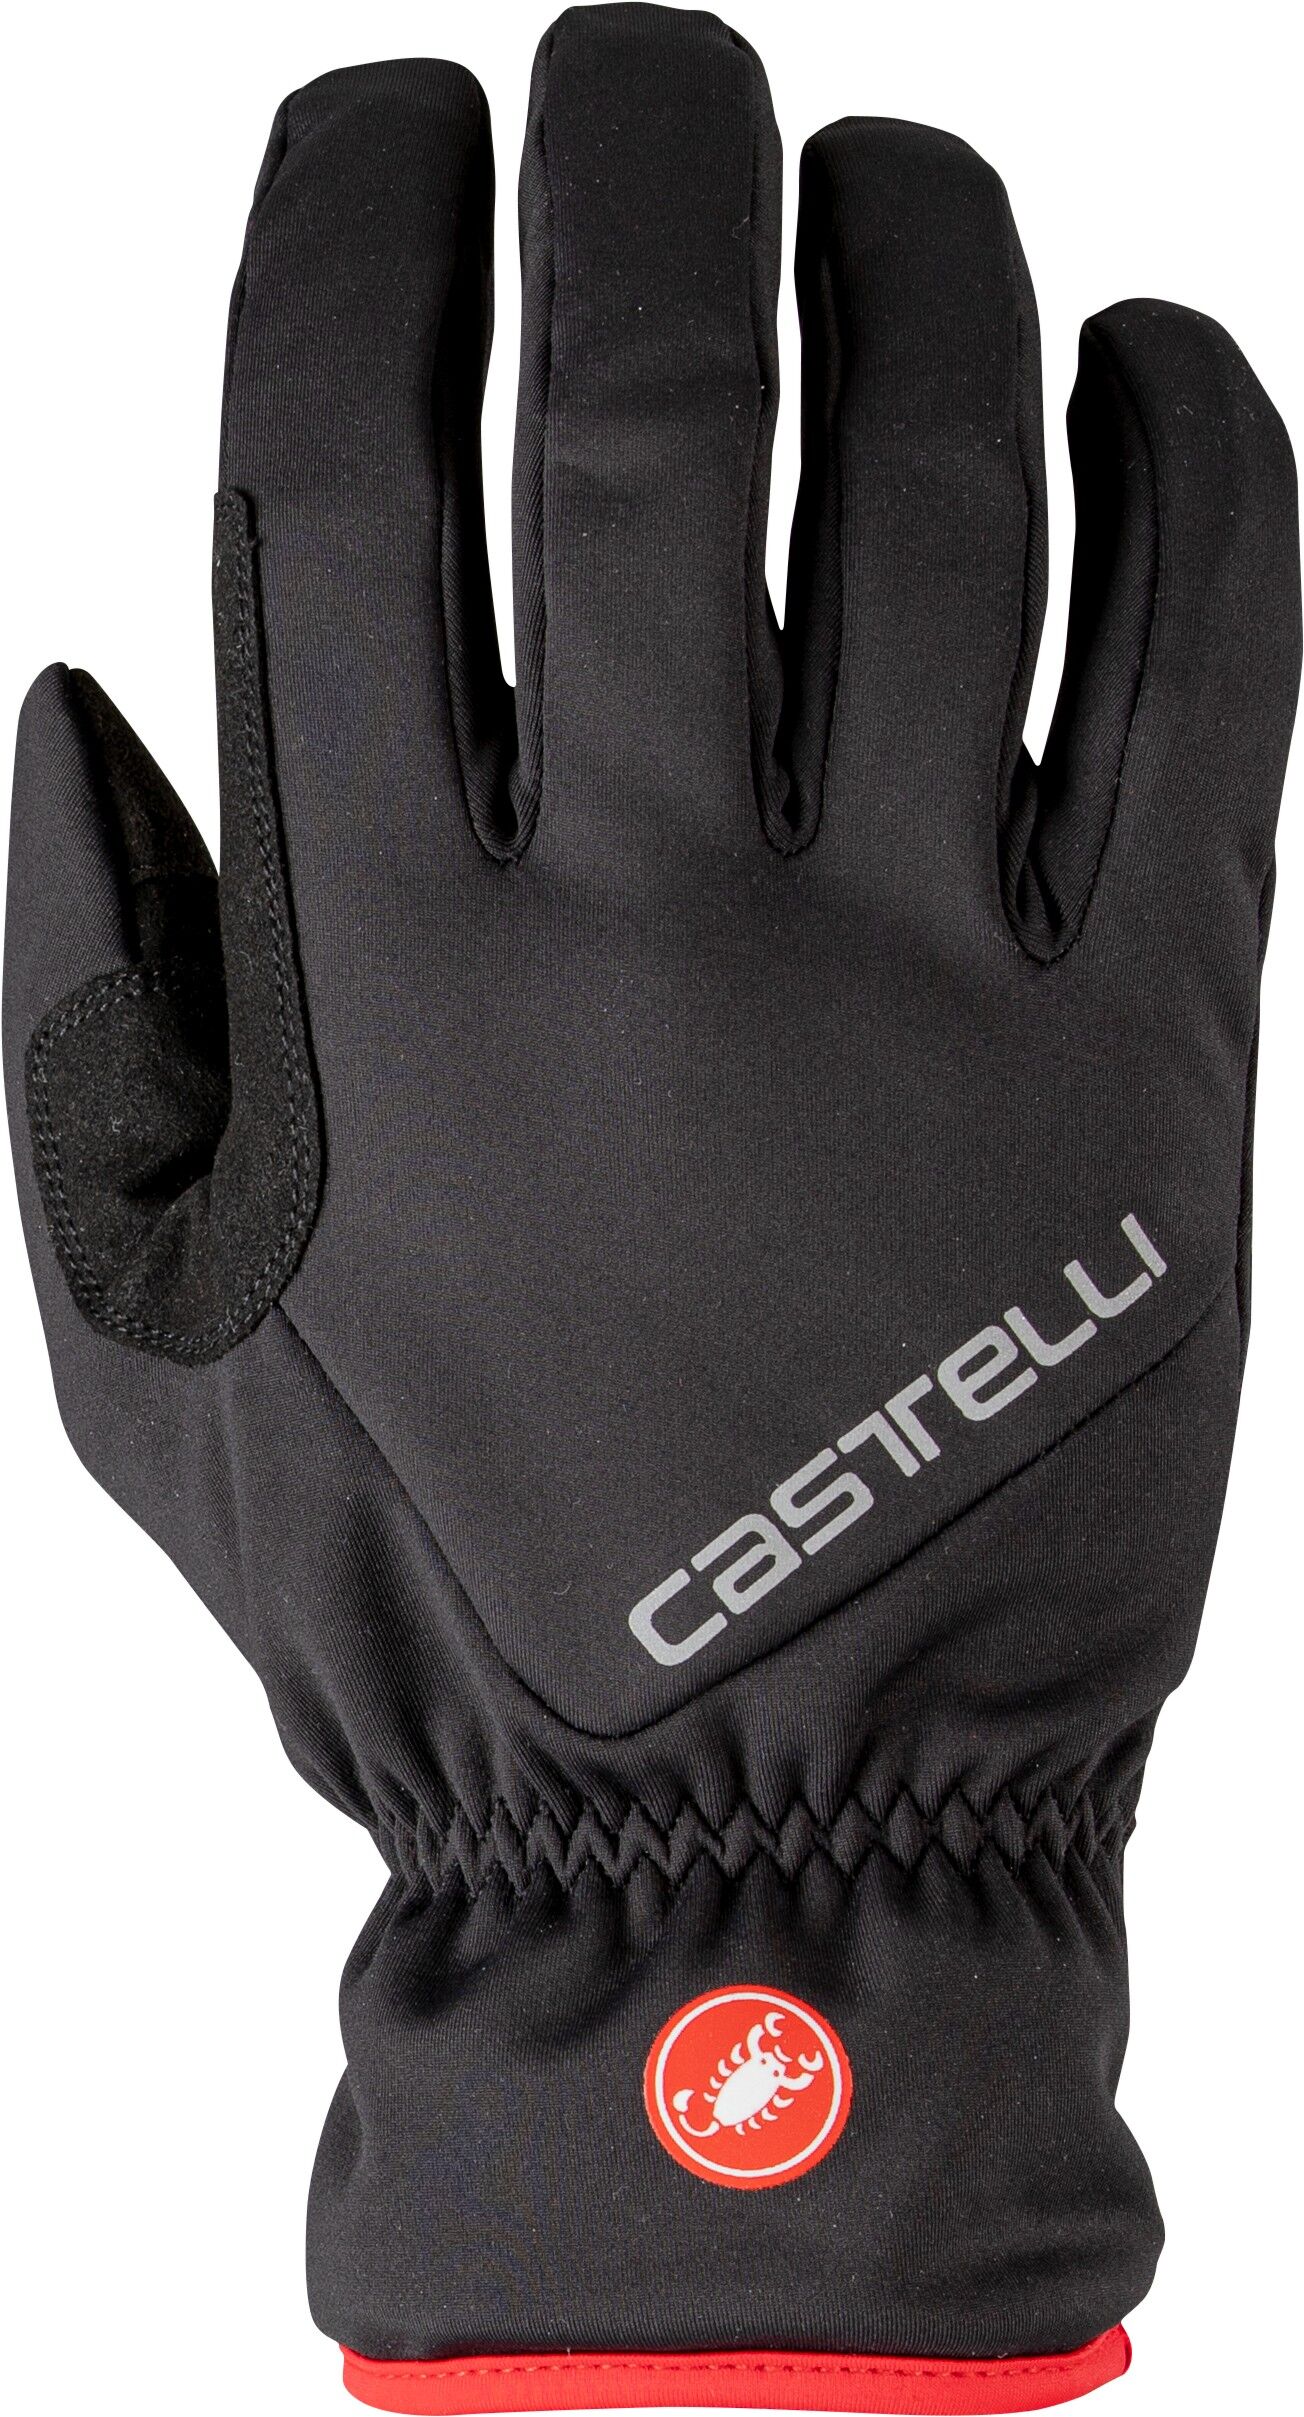 Castelli Entrata Thermal Glove - Cycling gloves